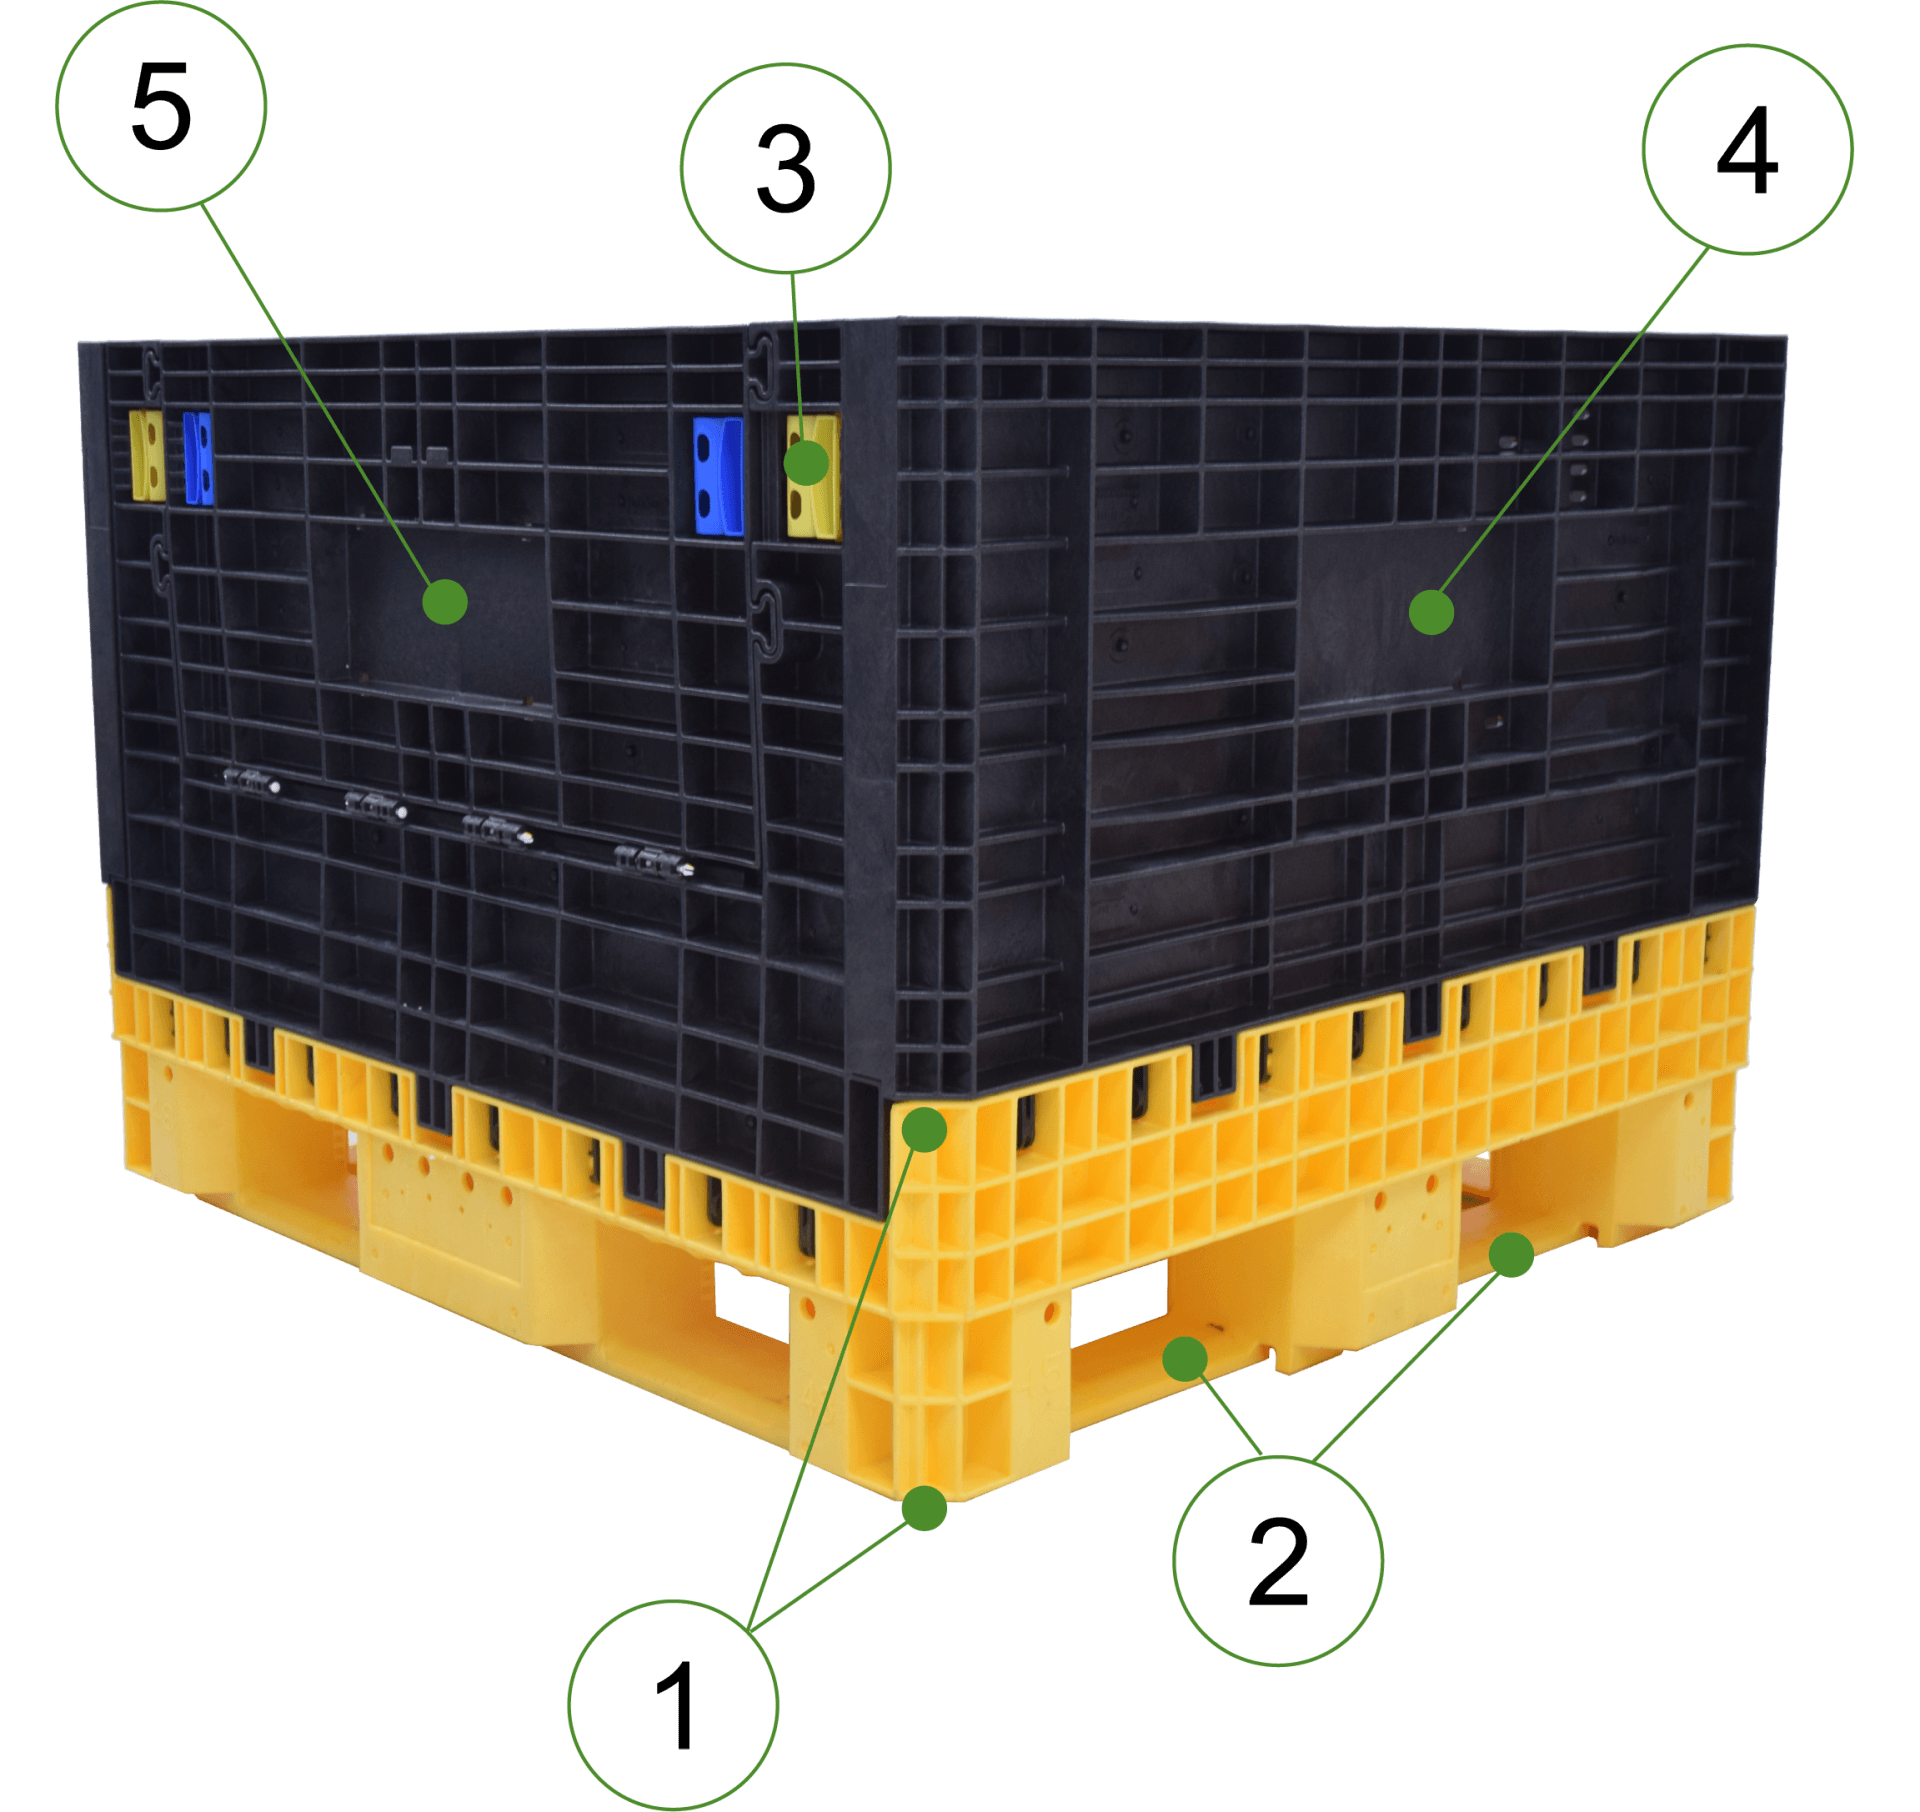 Inspection points of a bulk container